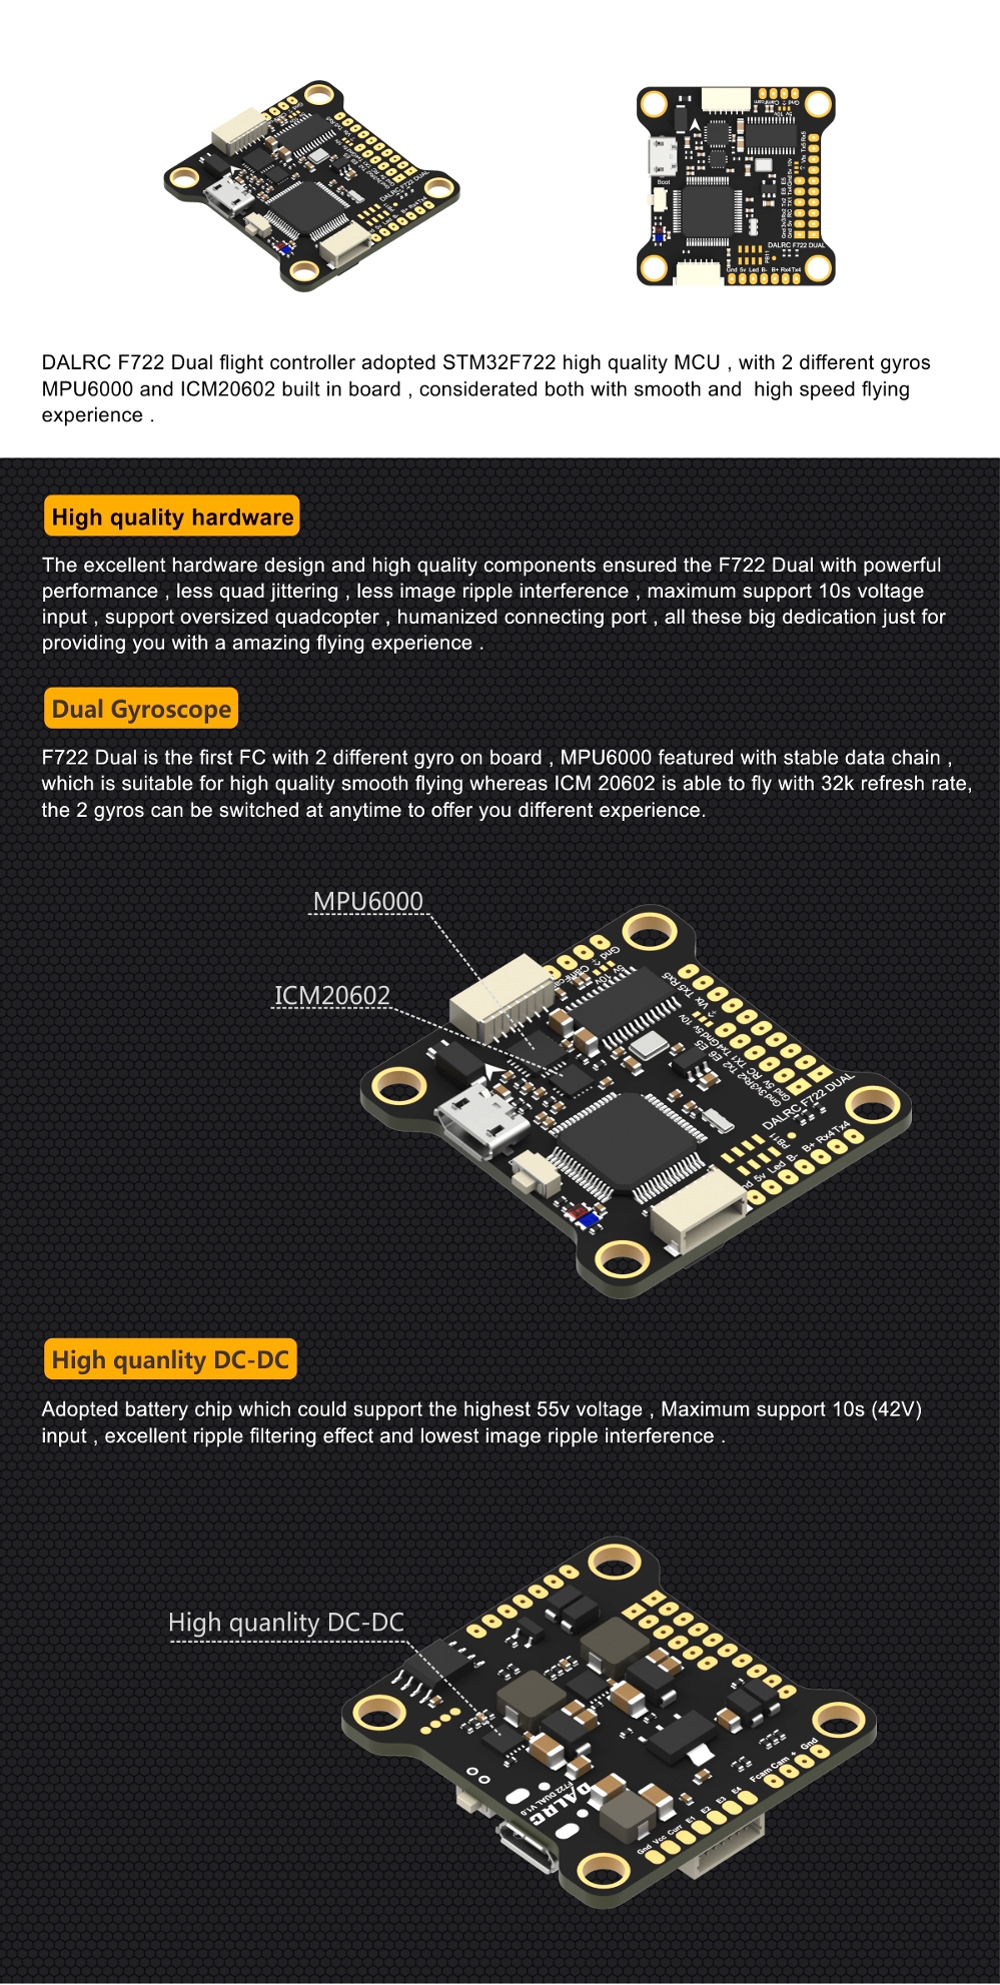 DALRC F722 DUAL STM32F722RGT6 F7 Flight Controller MPU6000 and ICM20602 Built-in OSD for RC Drone